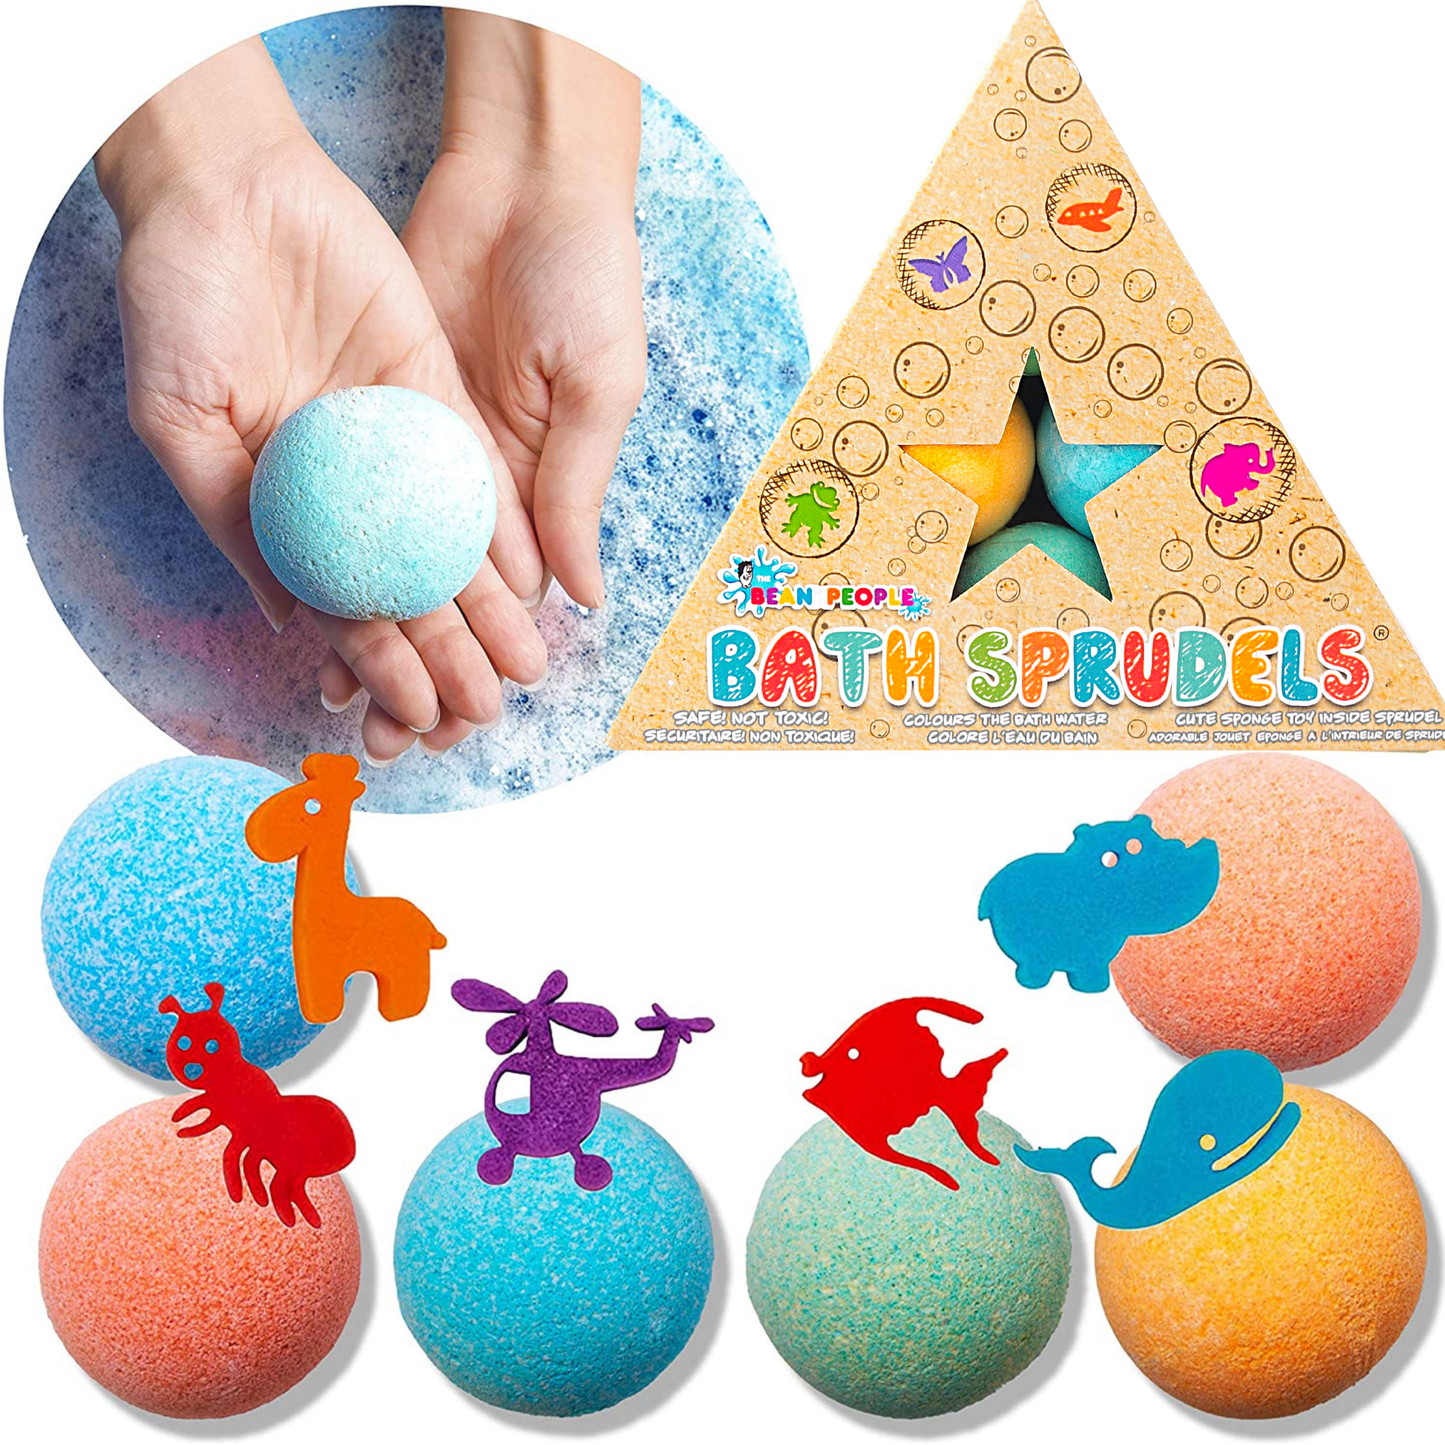 Bath Bombs with Surprise Sponge Toy - Pack of 6